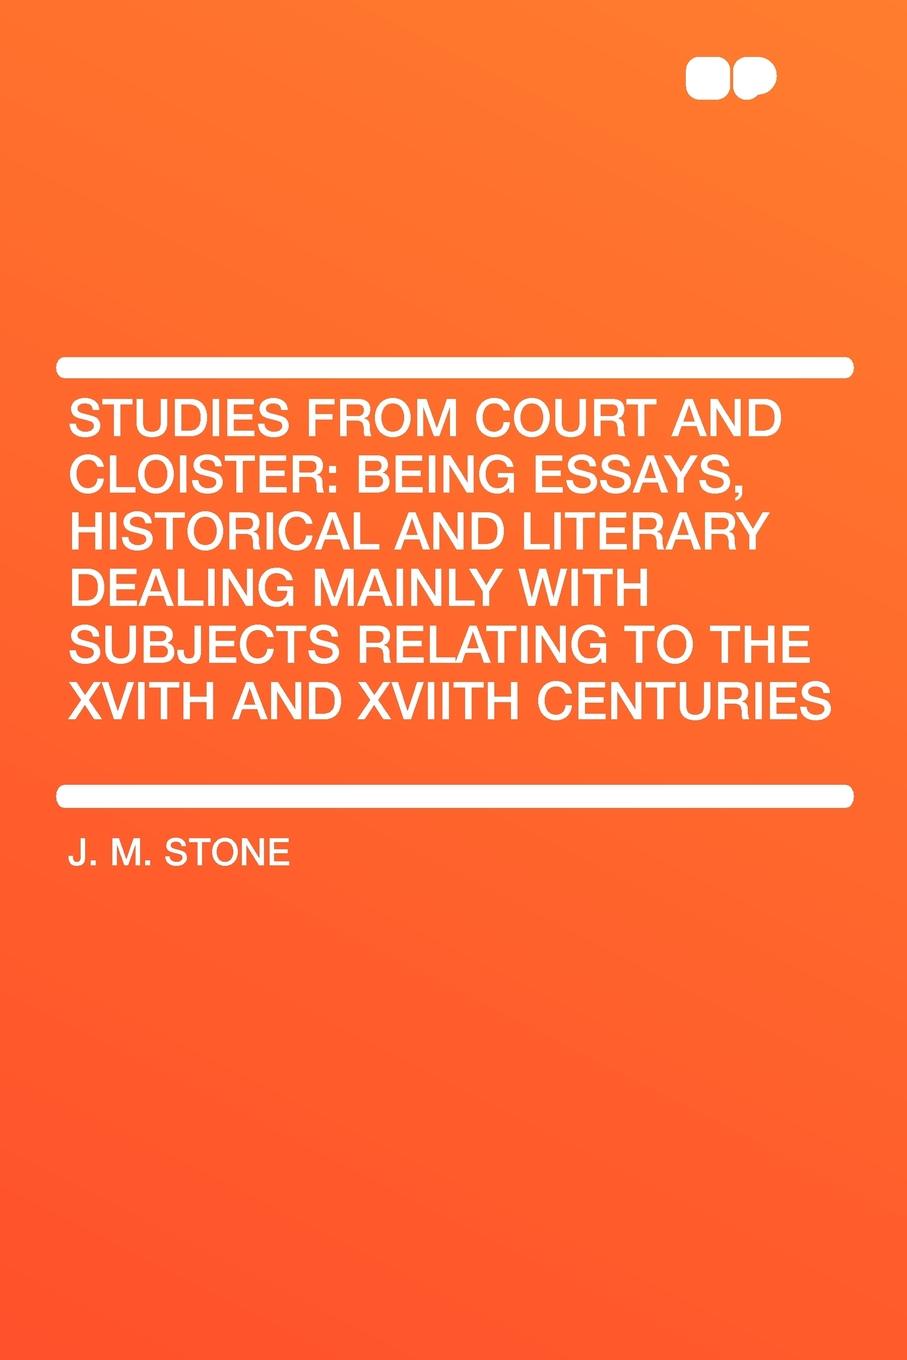 Studies from Court and Cloister. being essays, historical and literary dealing mainly with subjects relating to the XVIth and XVIIth centuries